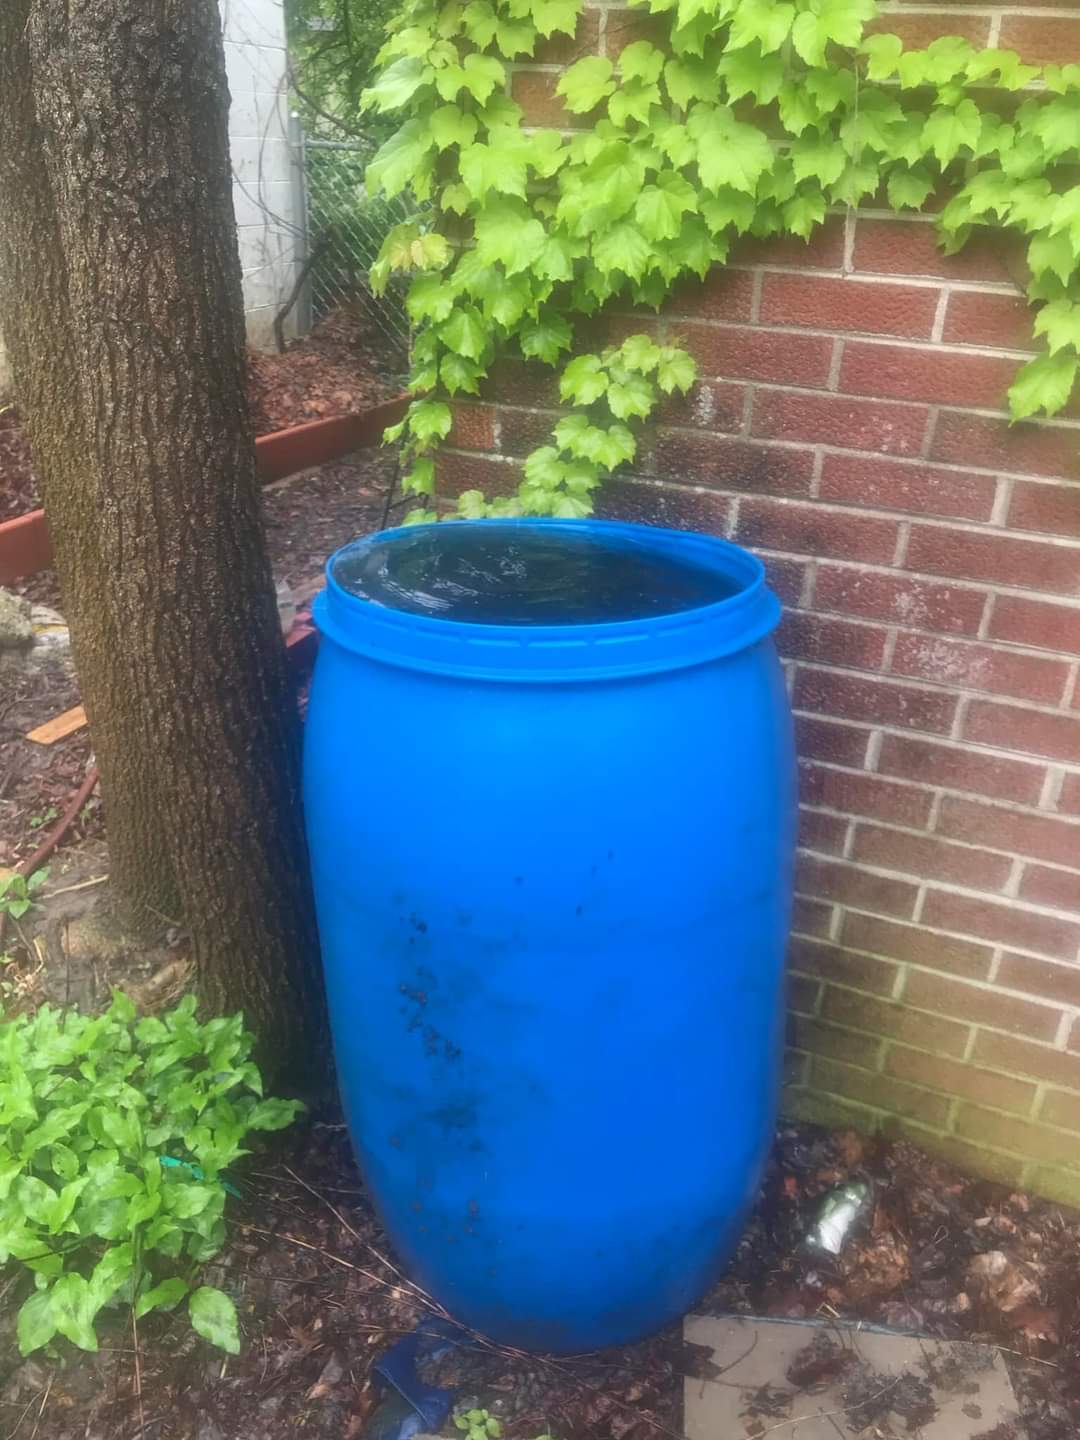 A blue rain barrel full of rainwater standing against a red brick wall with green grape vine cascading along the wall